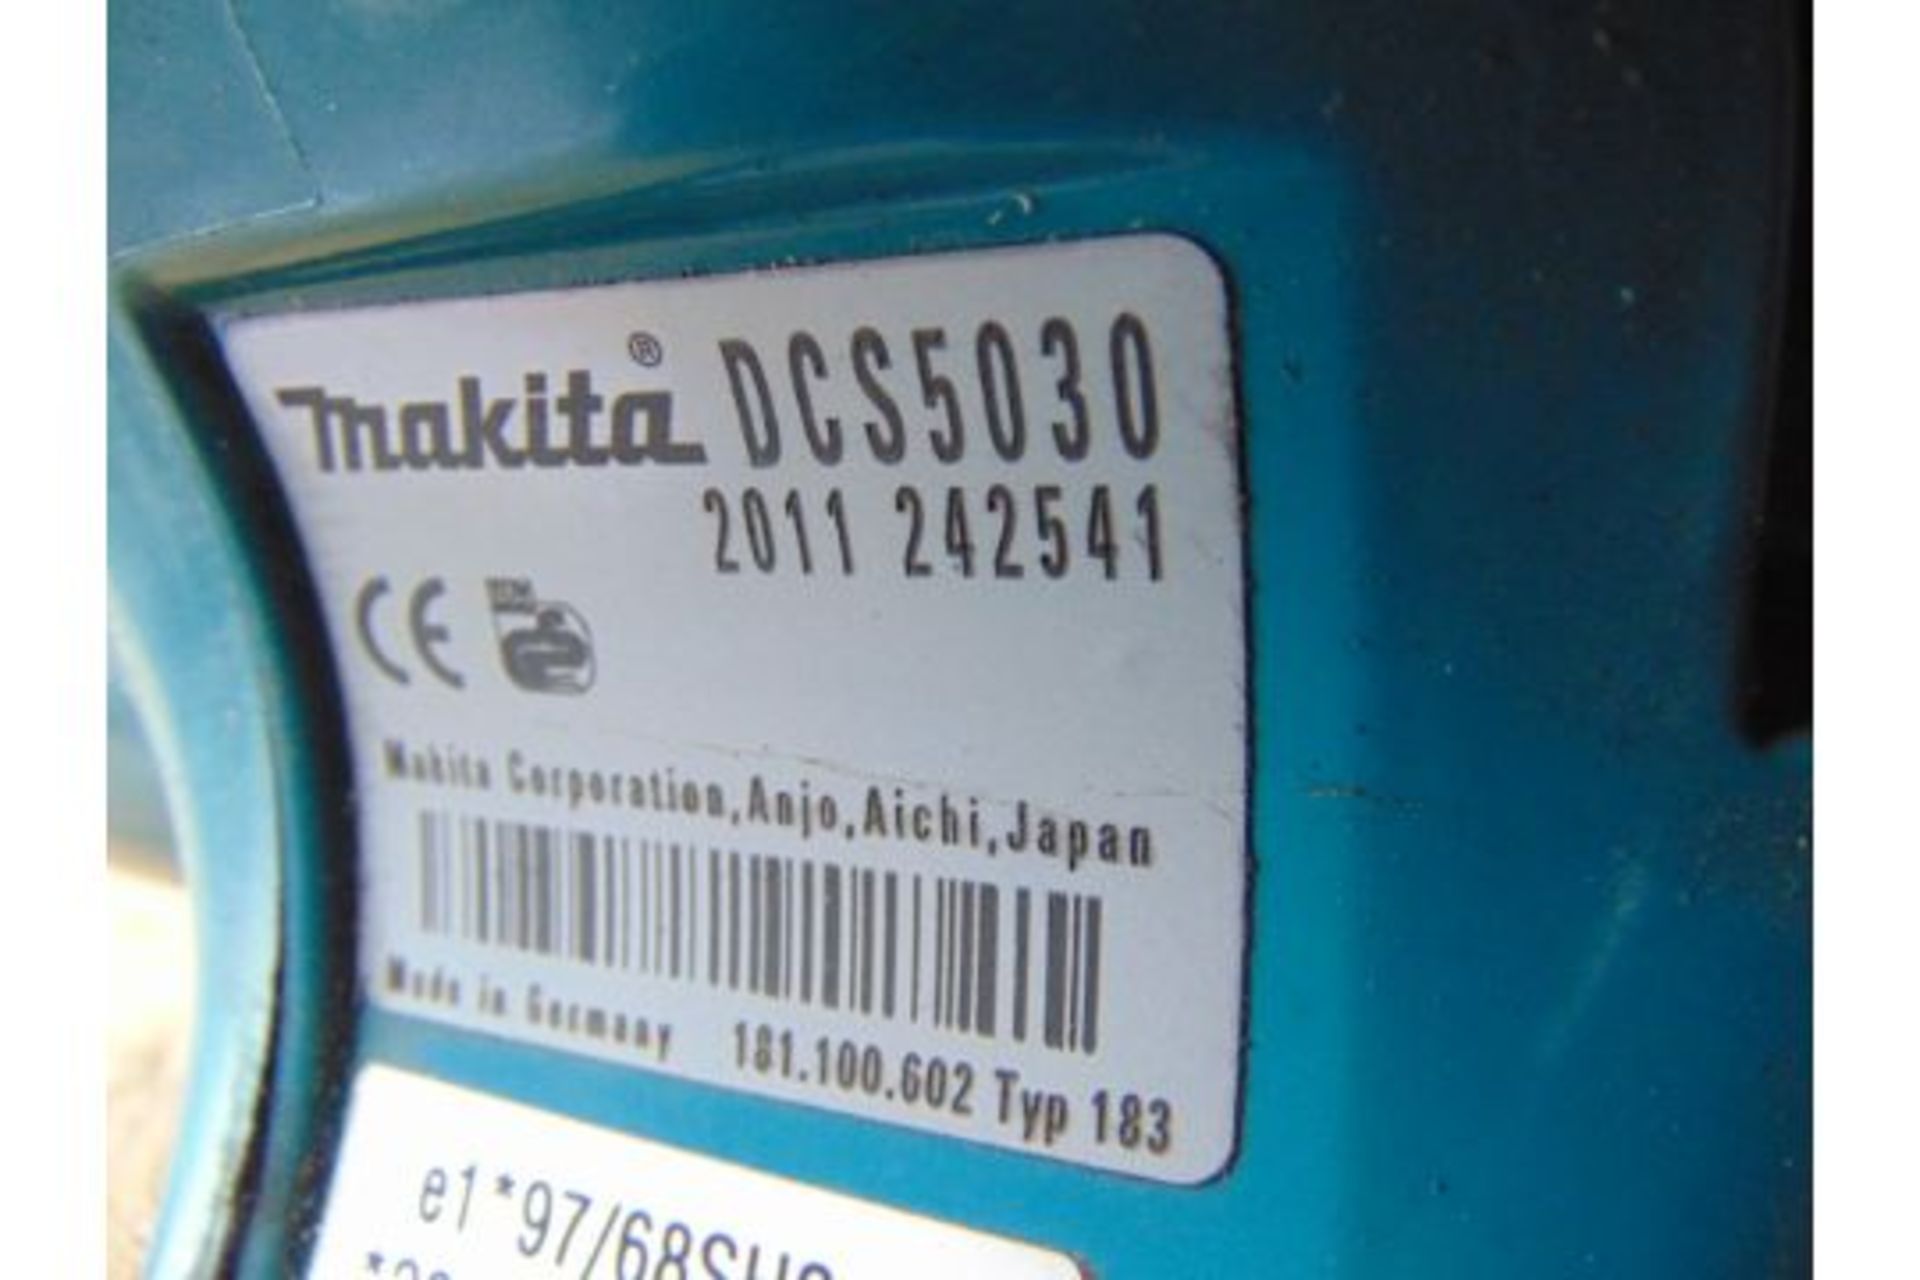 MAKITA DCS 5030 50CC Chainsaw c/w Chain Guard from MoD. - Image 4 of 4